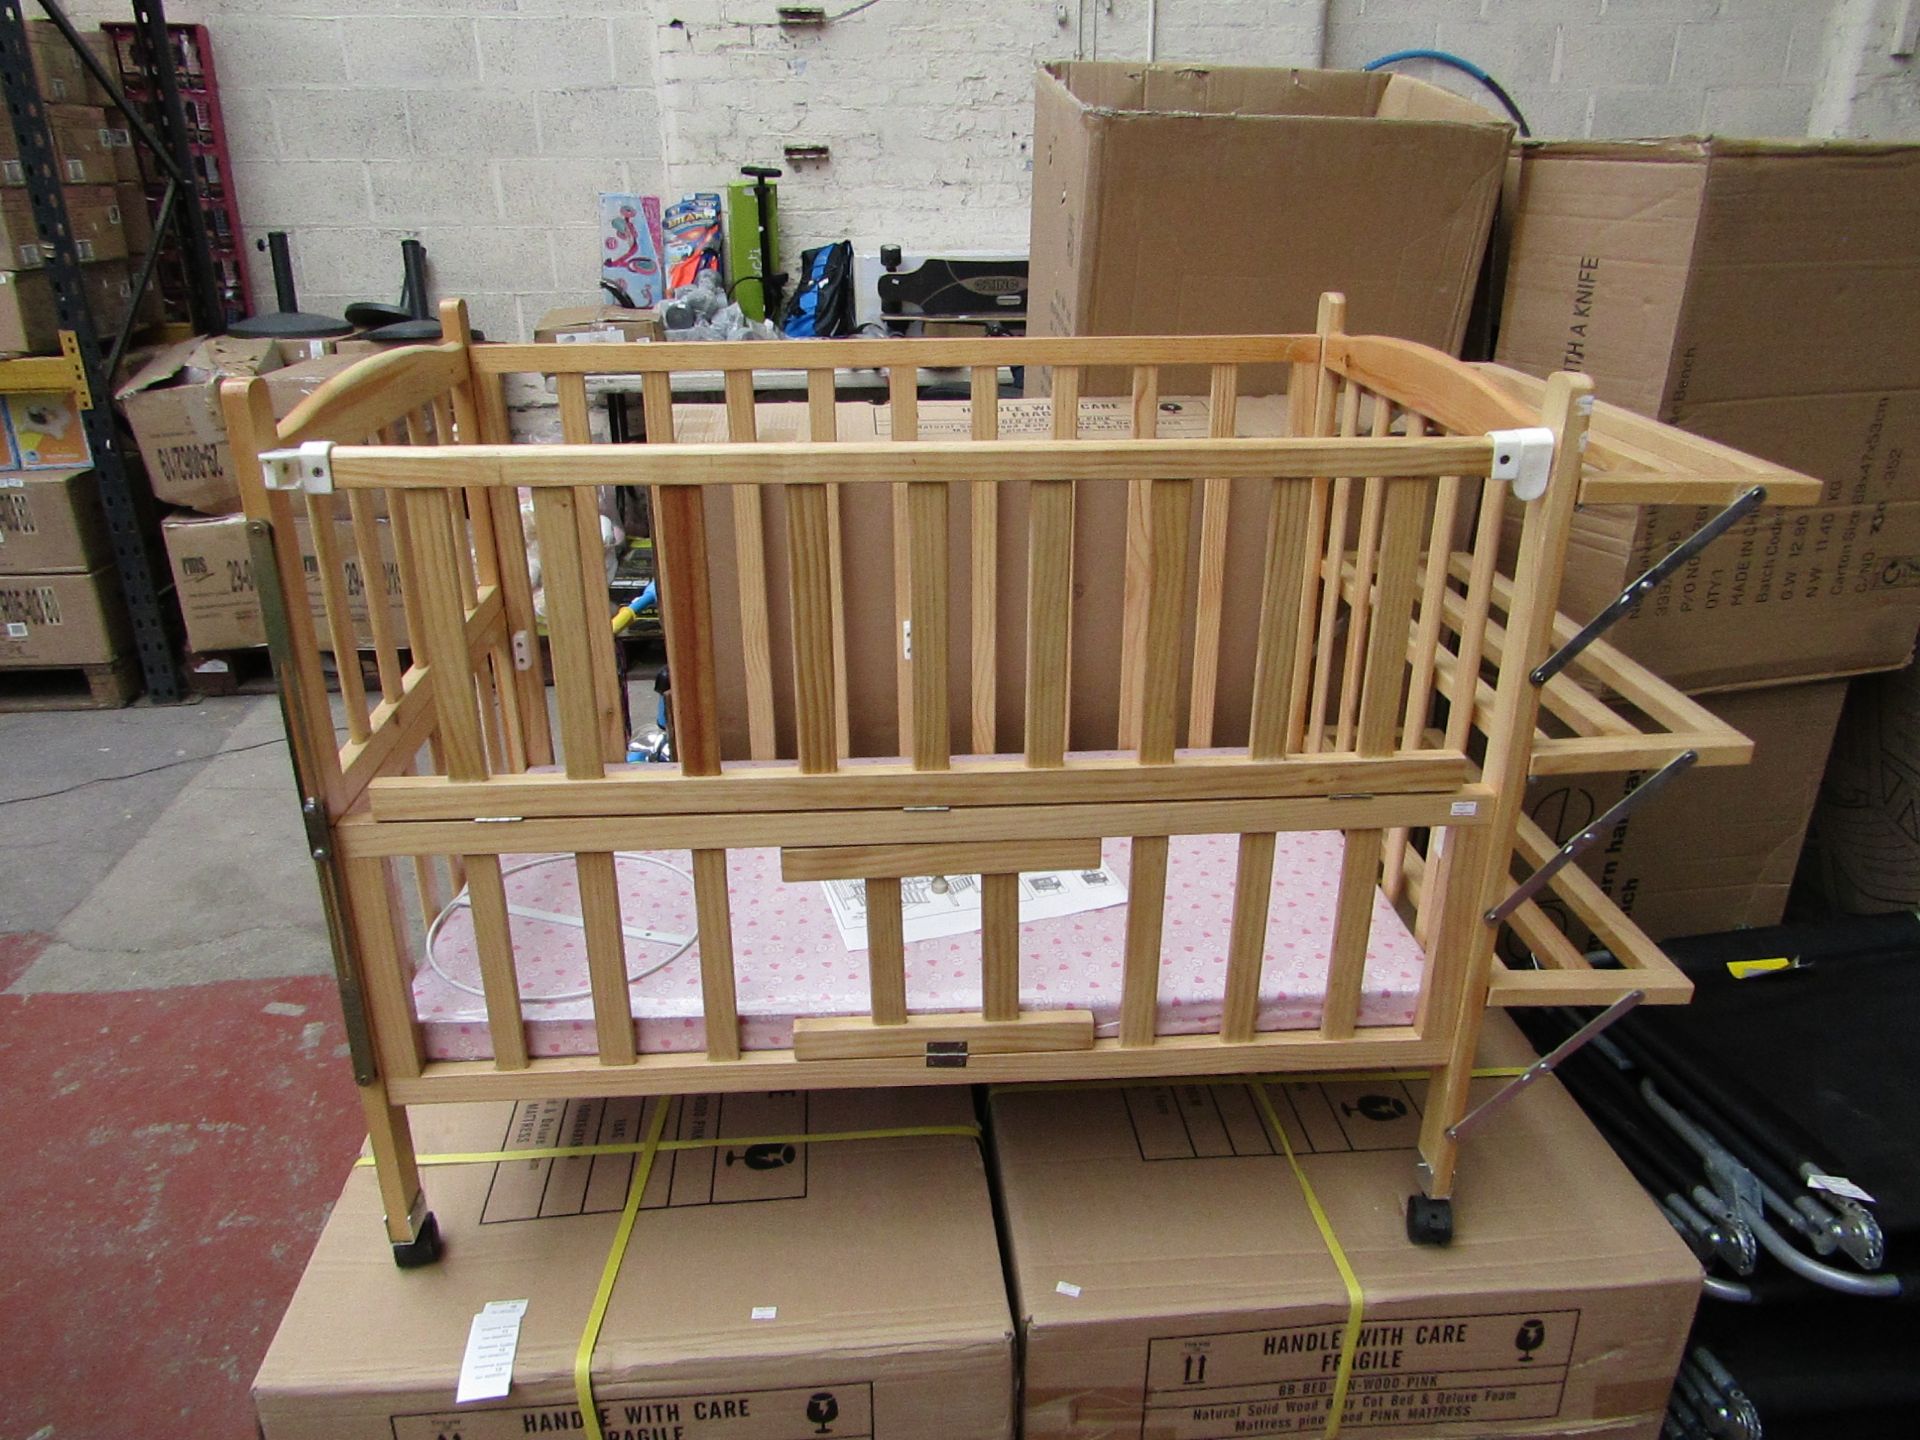 Childs wooden cot with built on shelving and Blue Mattress, new and boxed